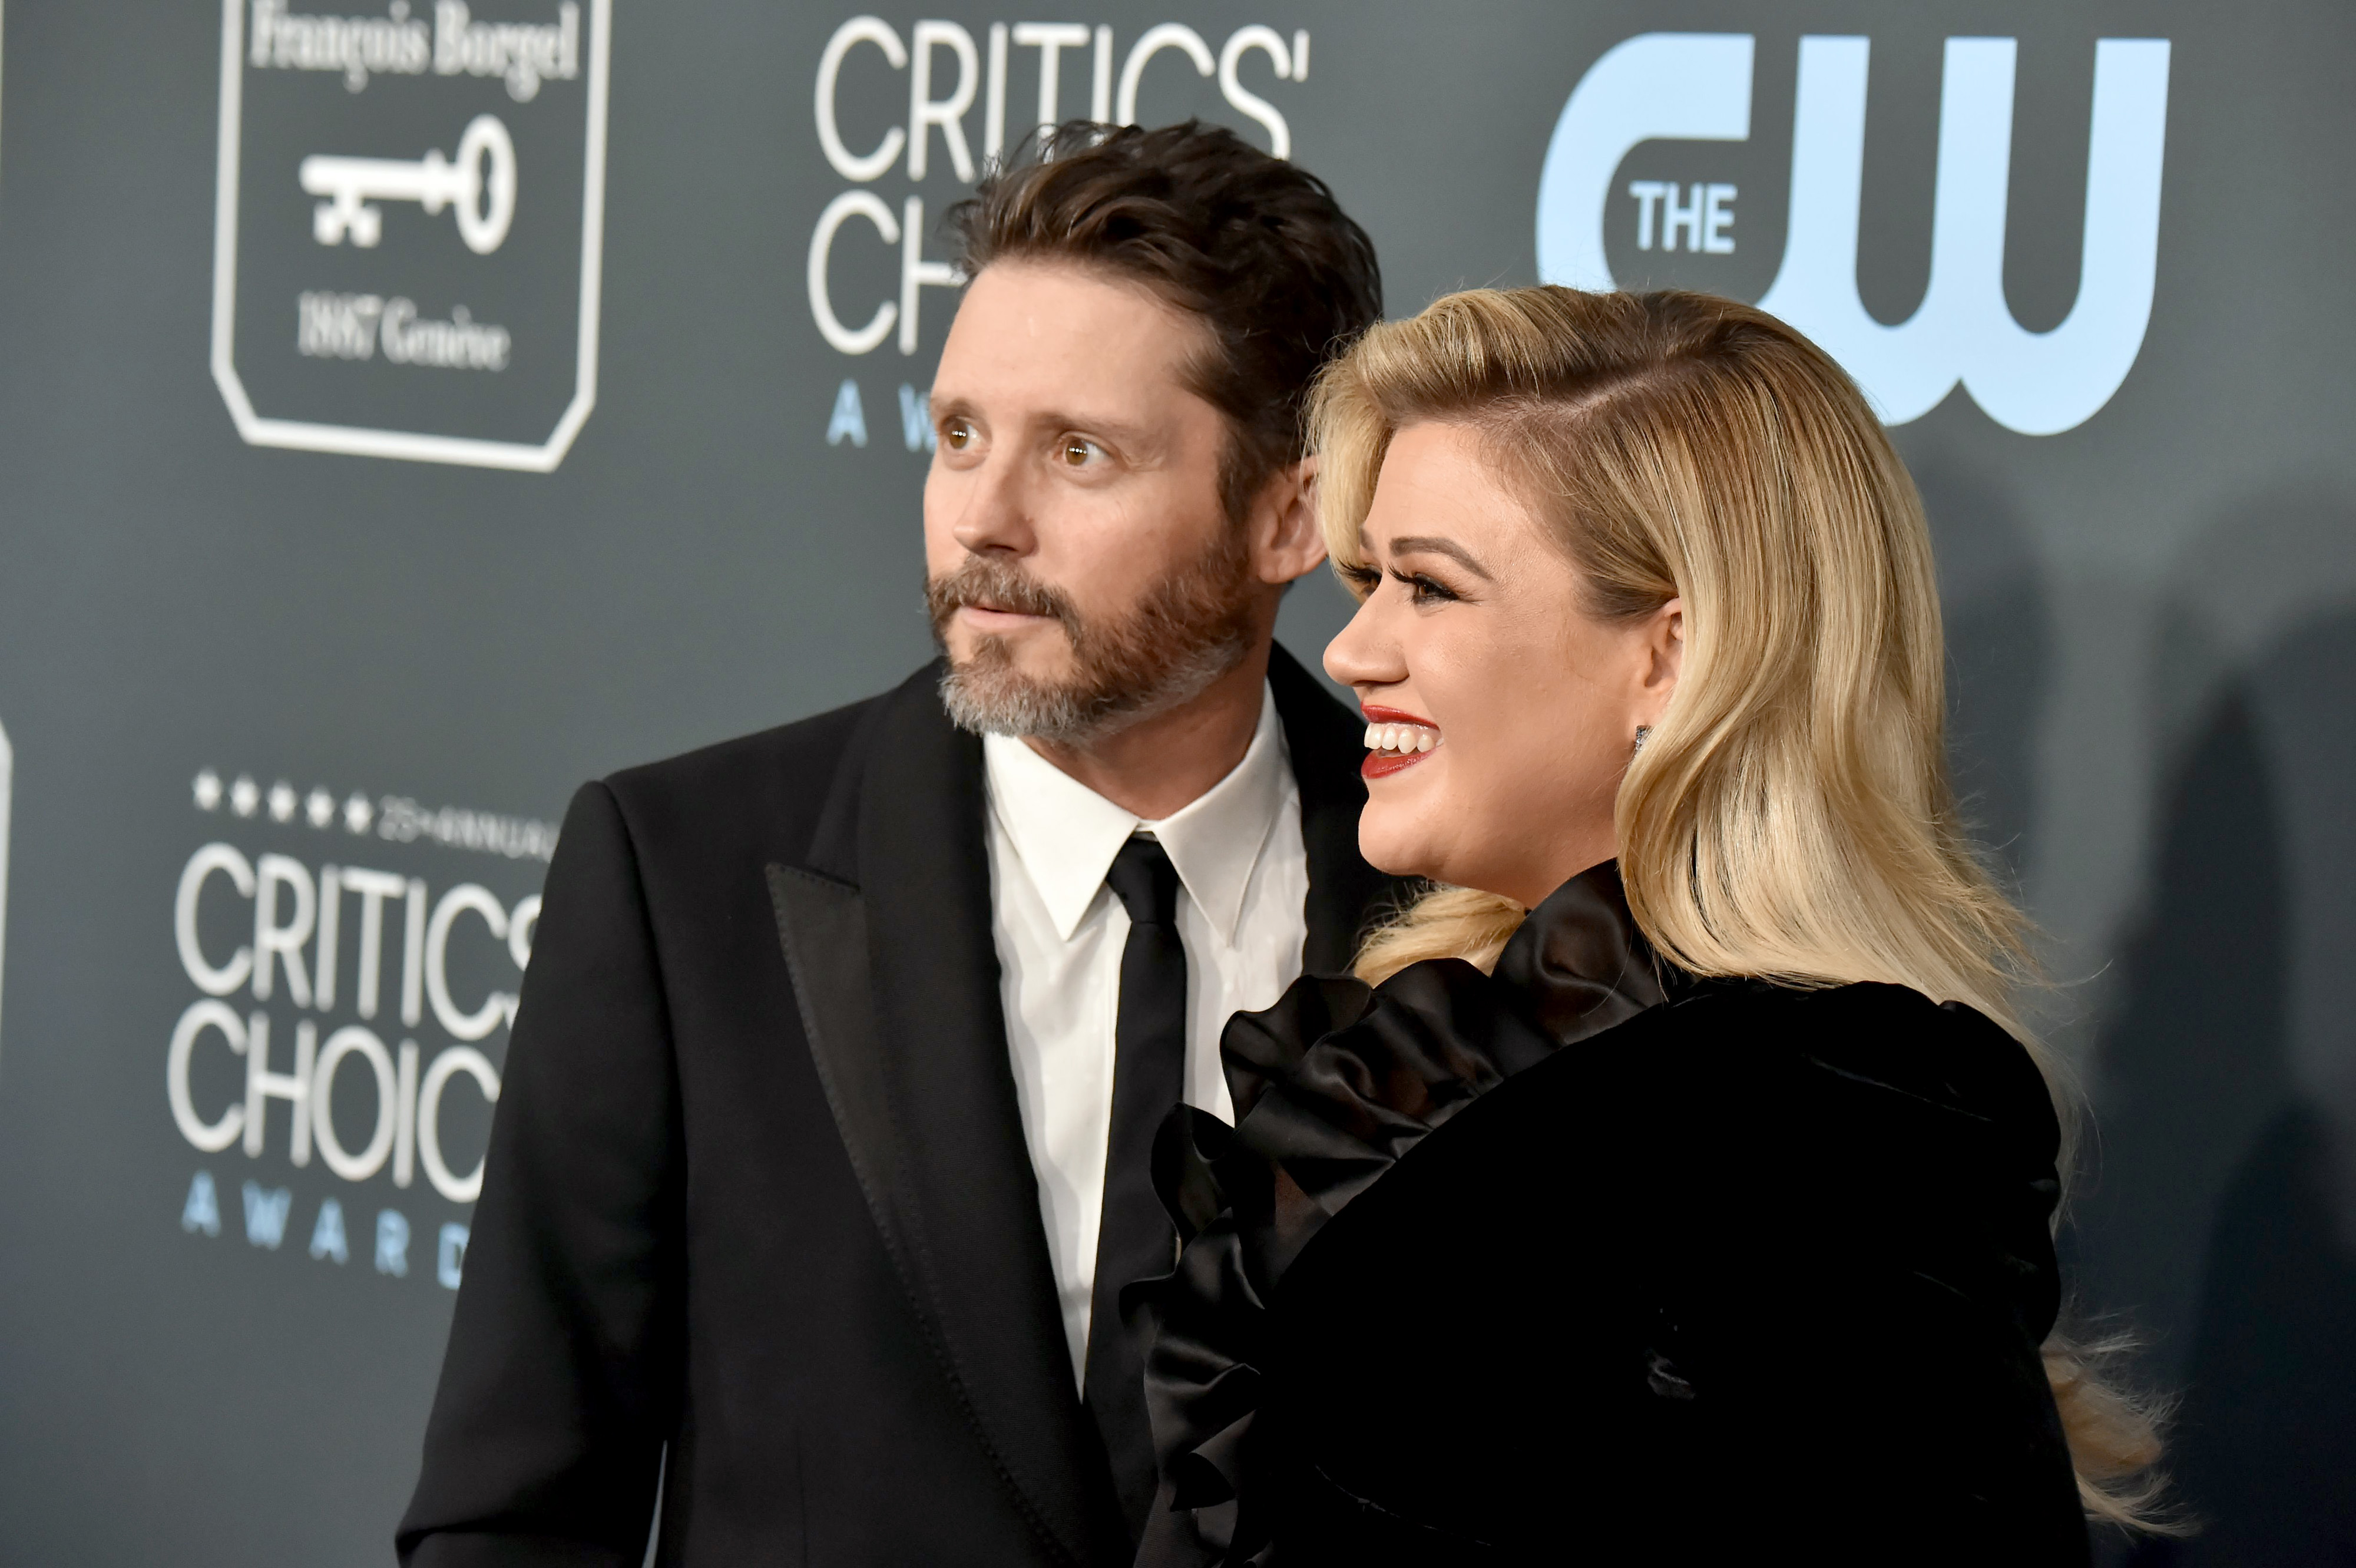 Brandon Blackstock and Kelly Clarkson during the 25th Annual Critics' Choice Awards at Barker Hangar on January 12, 2020, in Santa Monica, California. | Source: Getty Images